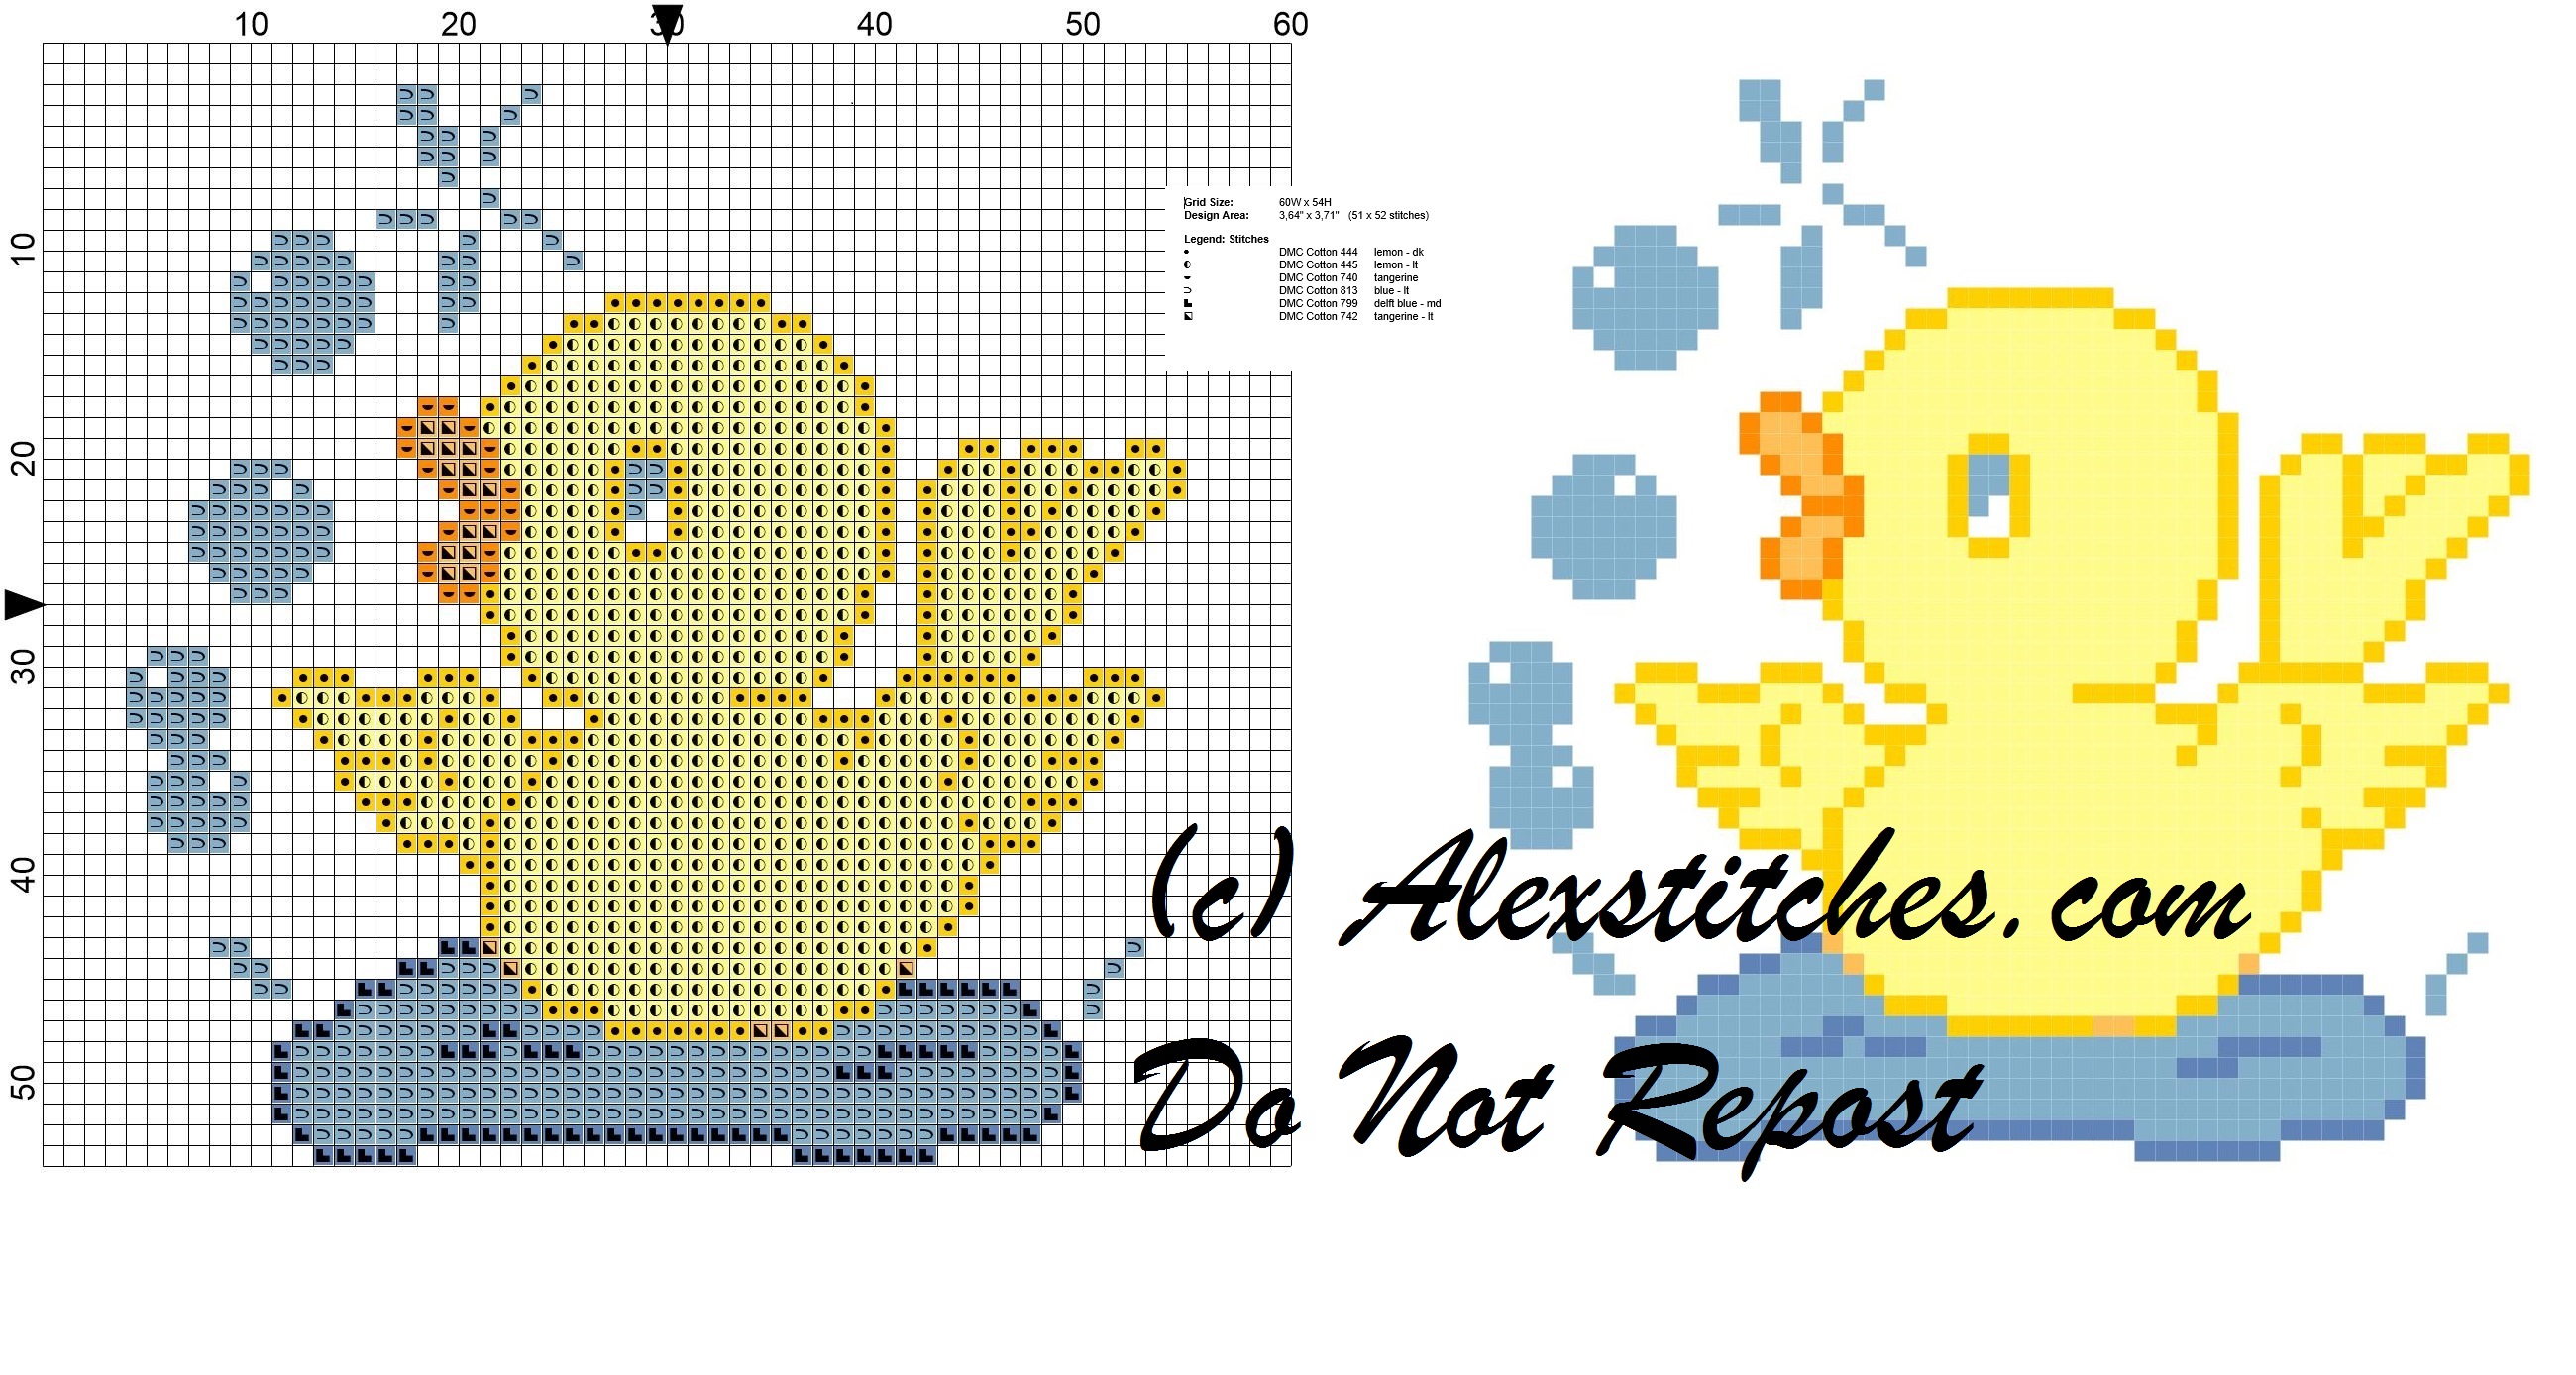 chick with soap bubbles cross stitch pattern